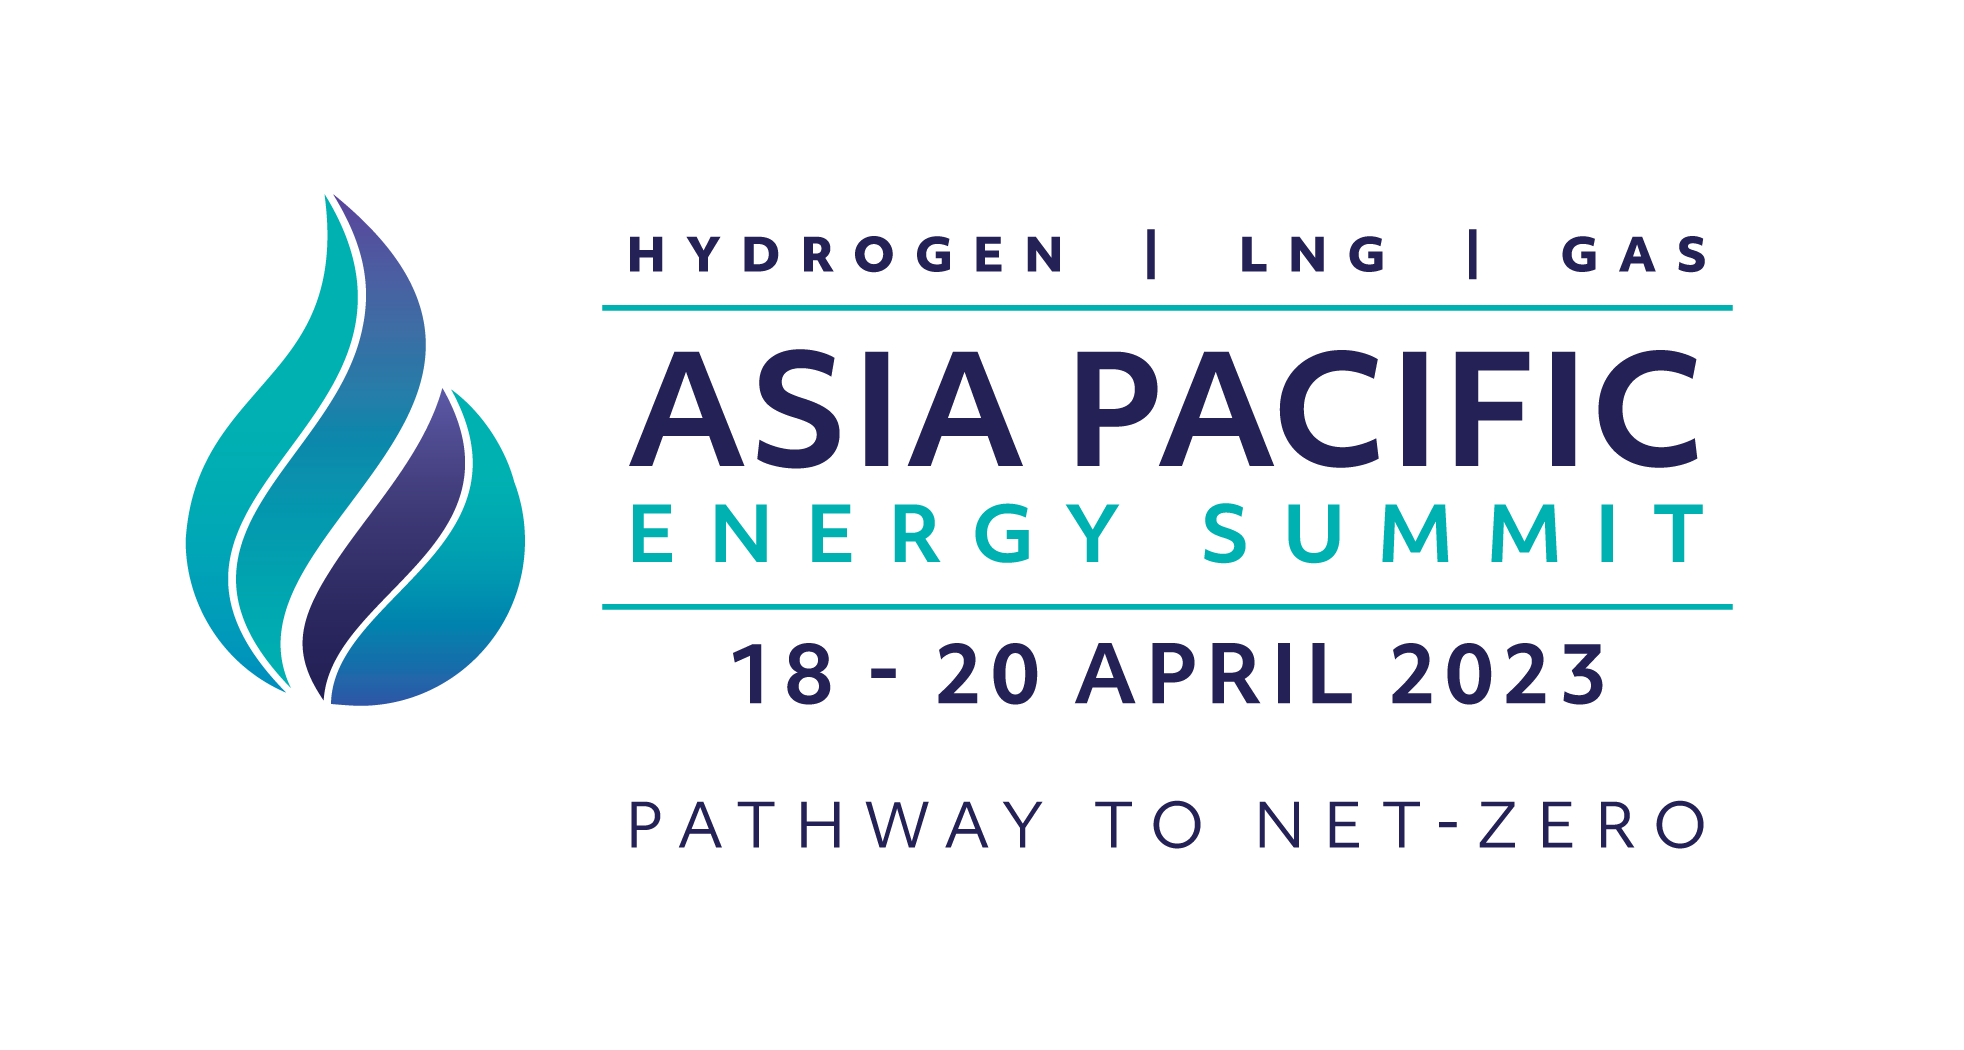 ASIA PACIFIC ENERGY SUMMIT